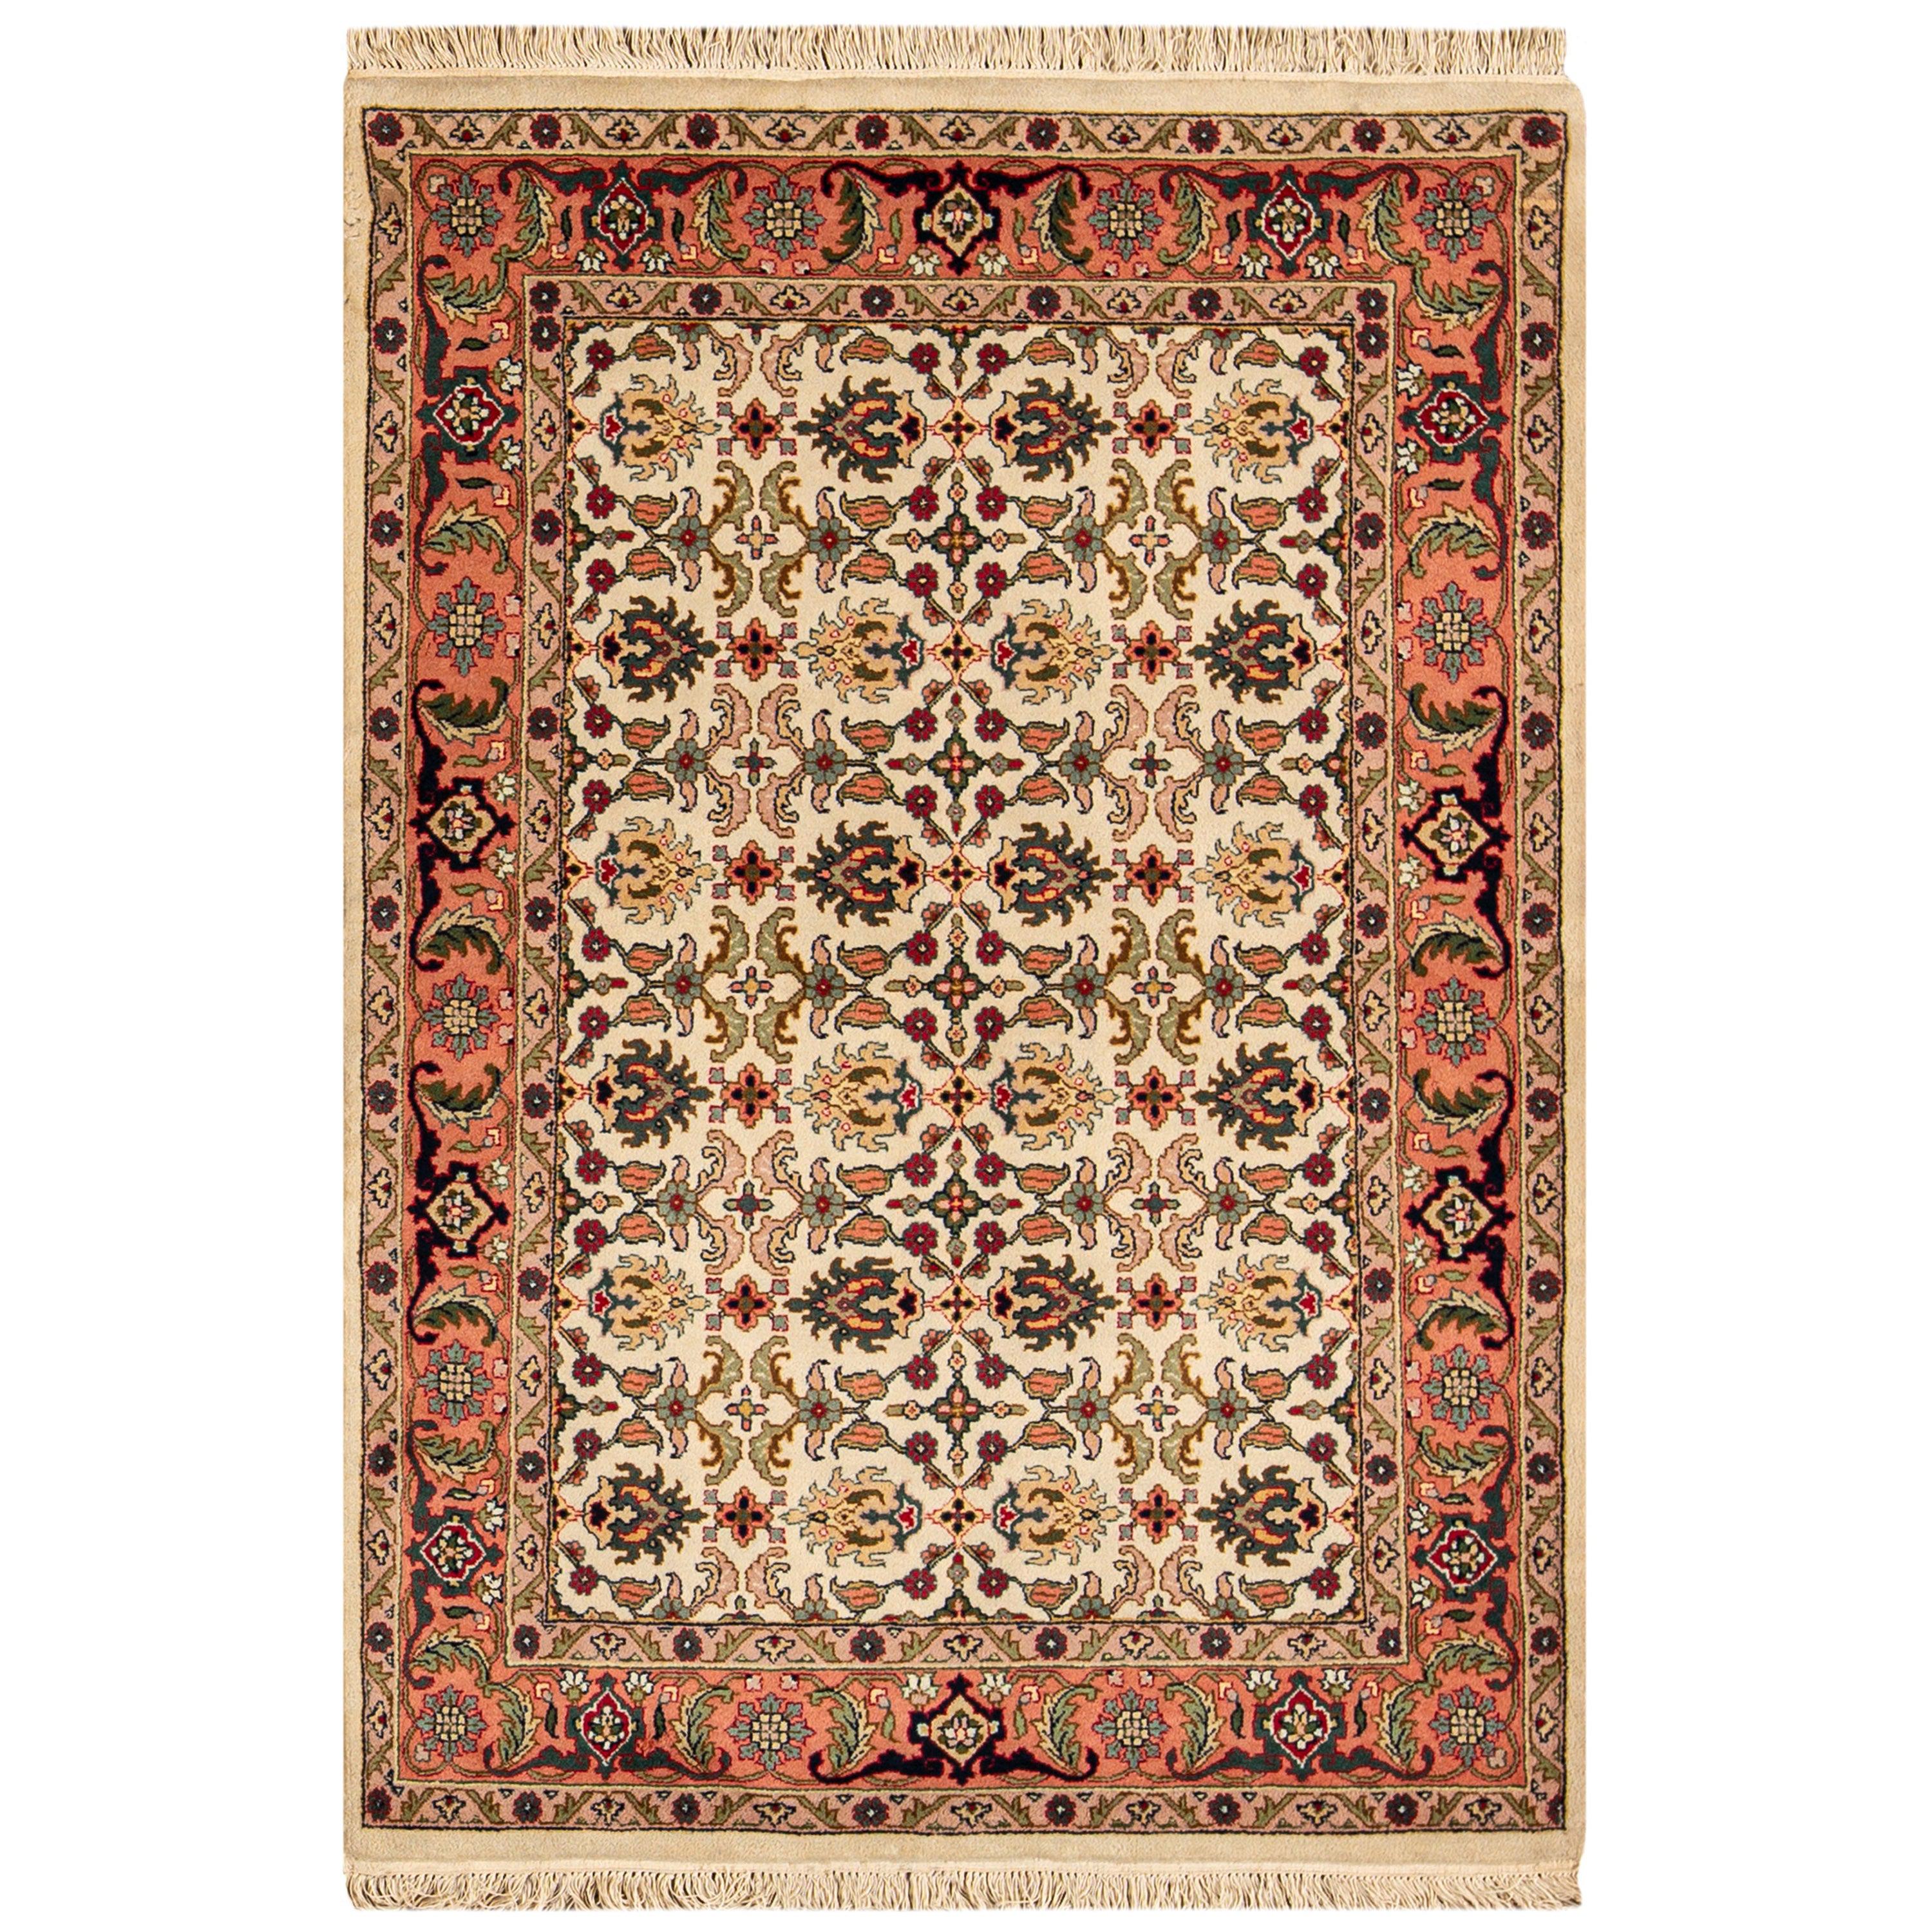 Handwoven Wool Area Rug 4'2 x 6'2 For Sale